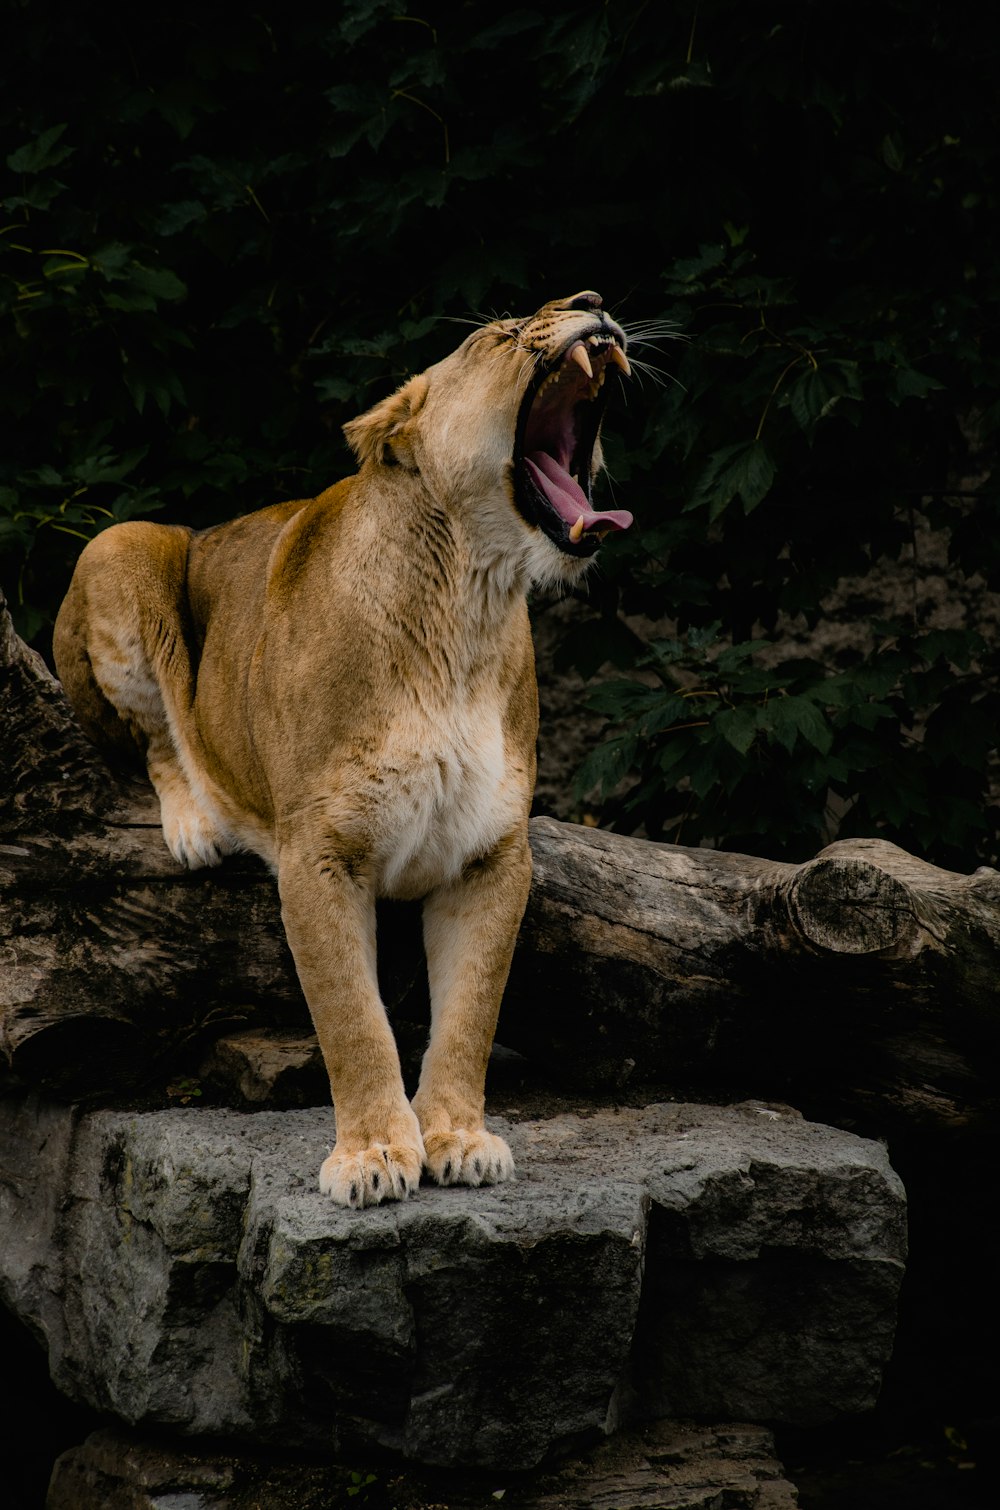 Female Lion Pictures | Download Free Images on Unsplash